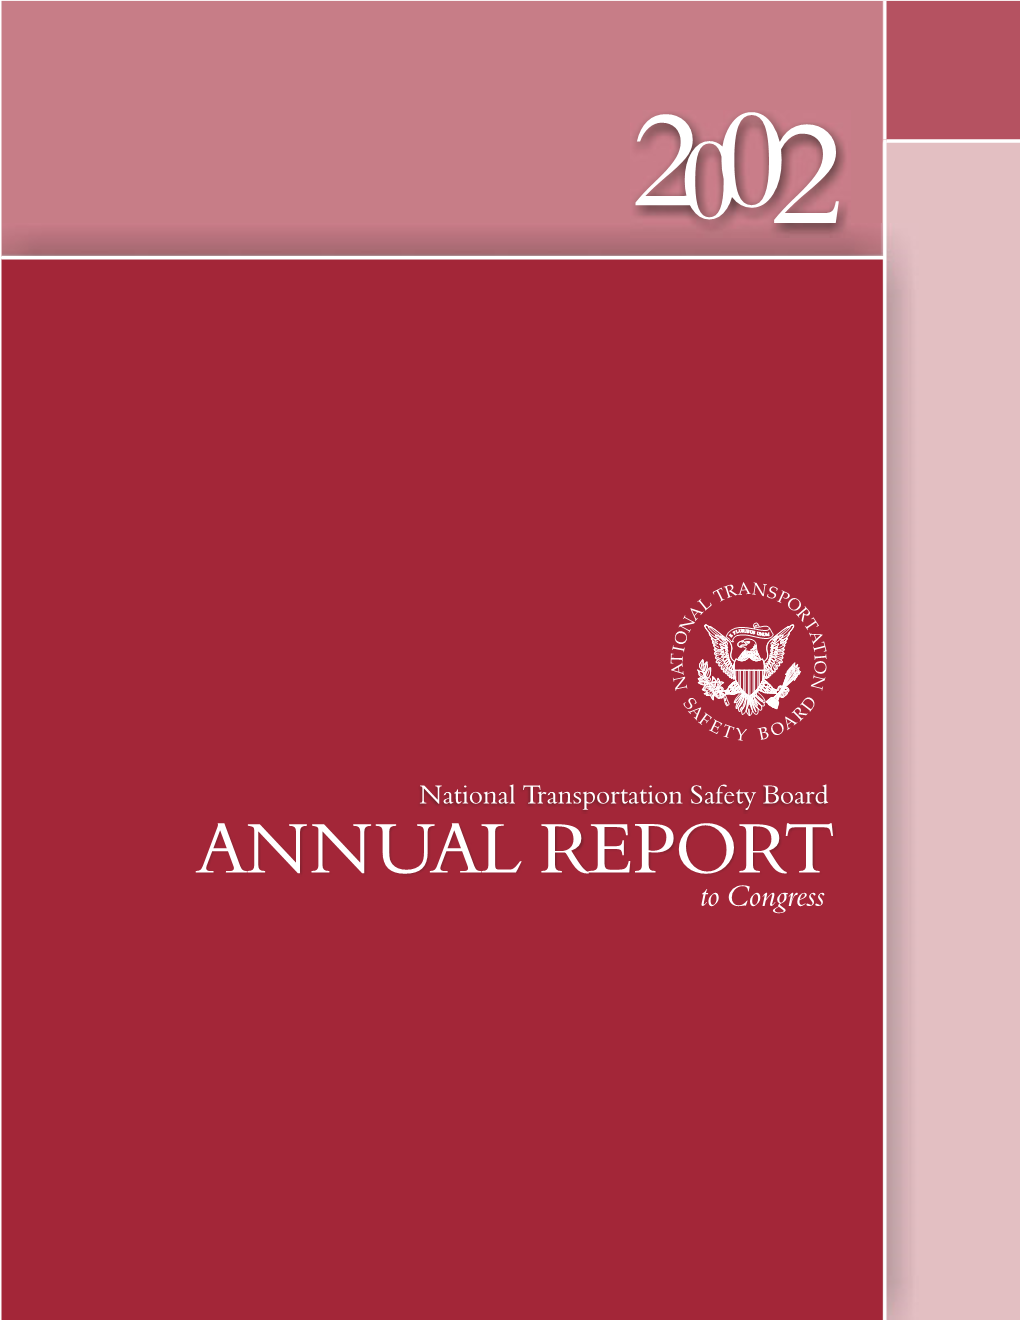 2002 NTSB Annual Report to Congress